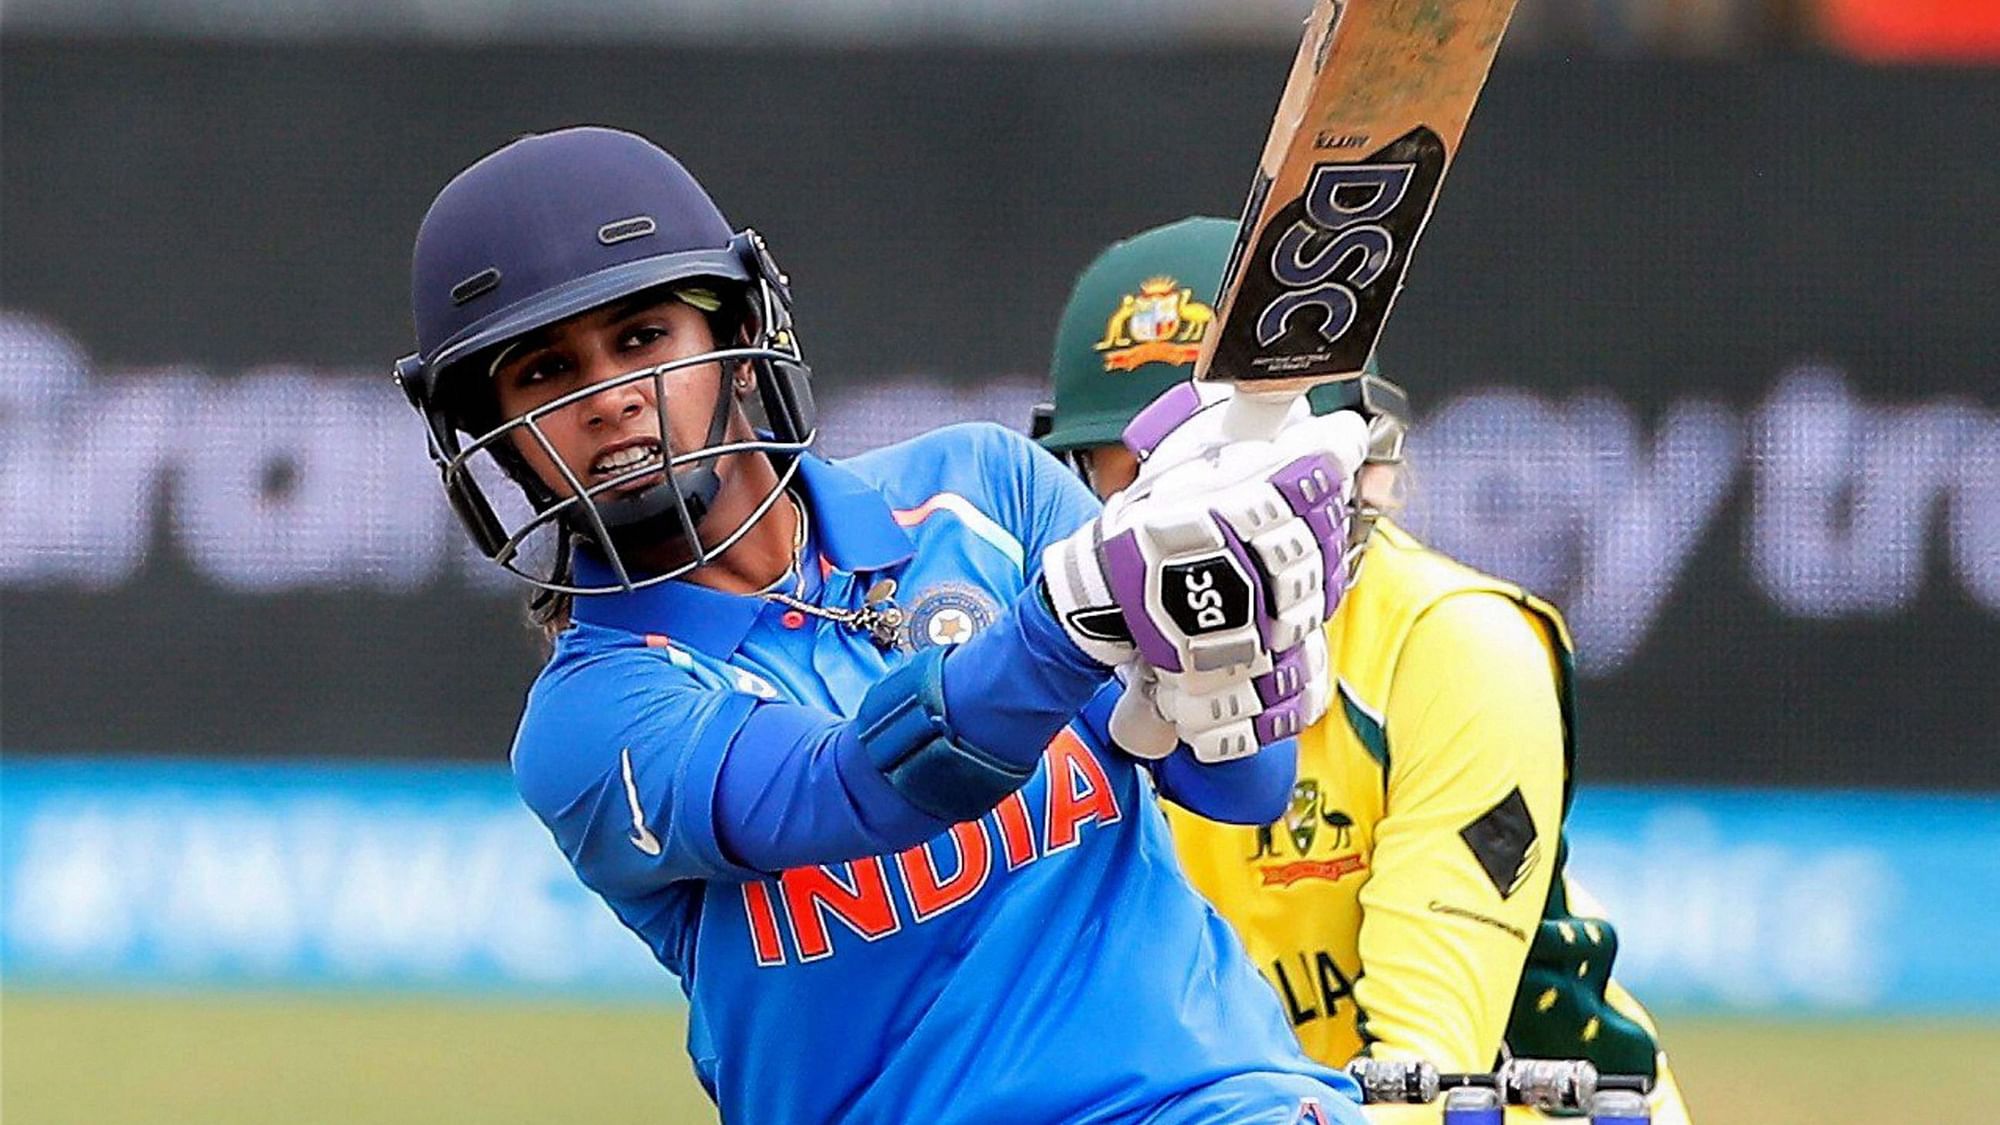 Former India captain Shantha Rangaswamy said that Mithali Raj took the right decision by retiring from T20 Internationals.